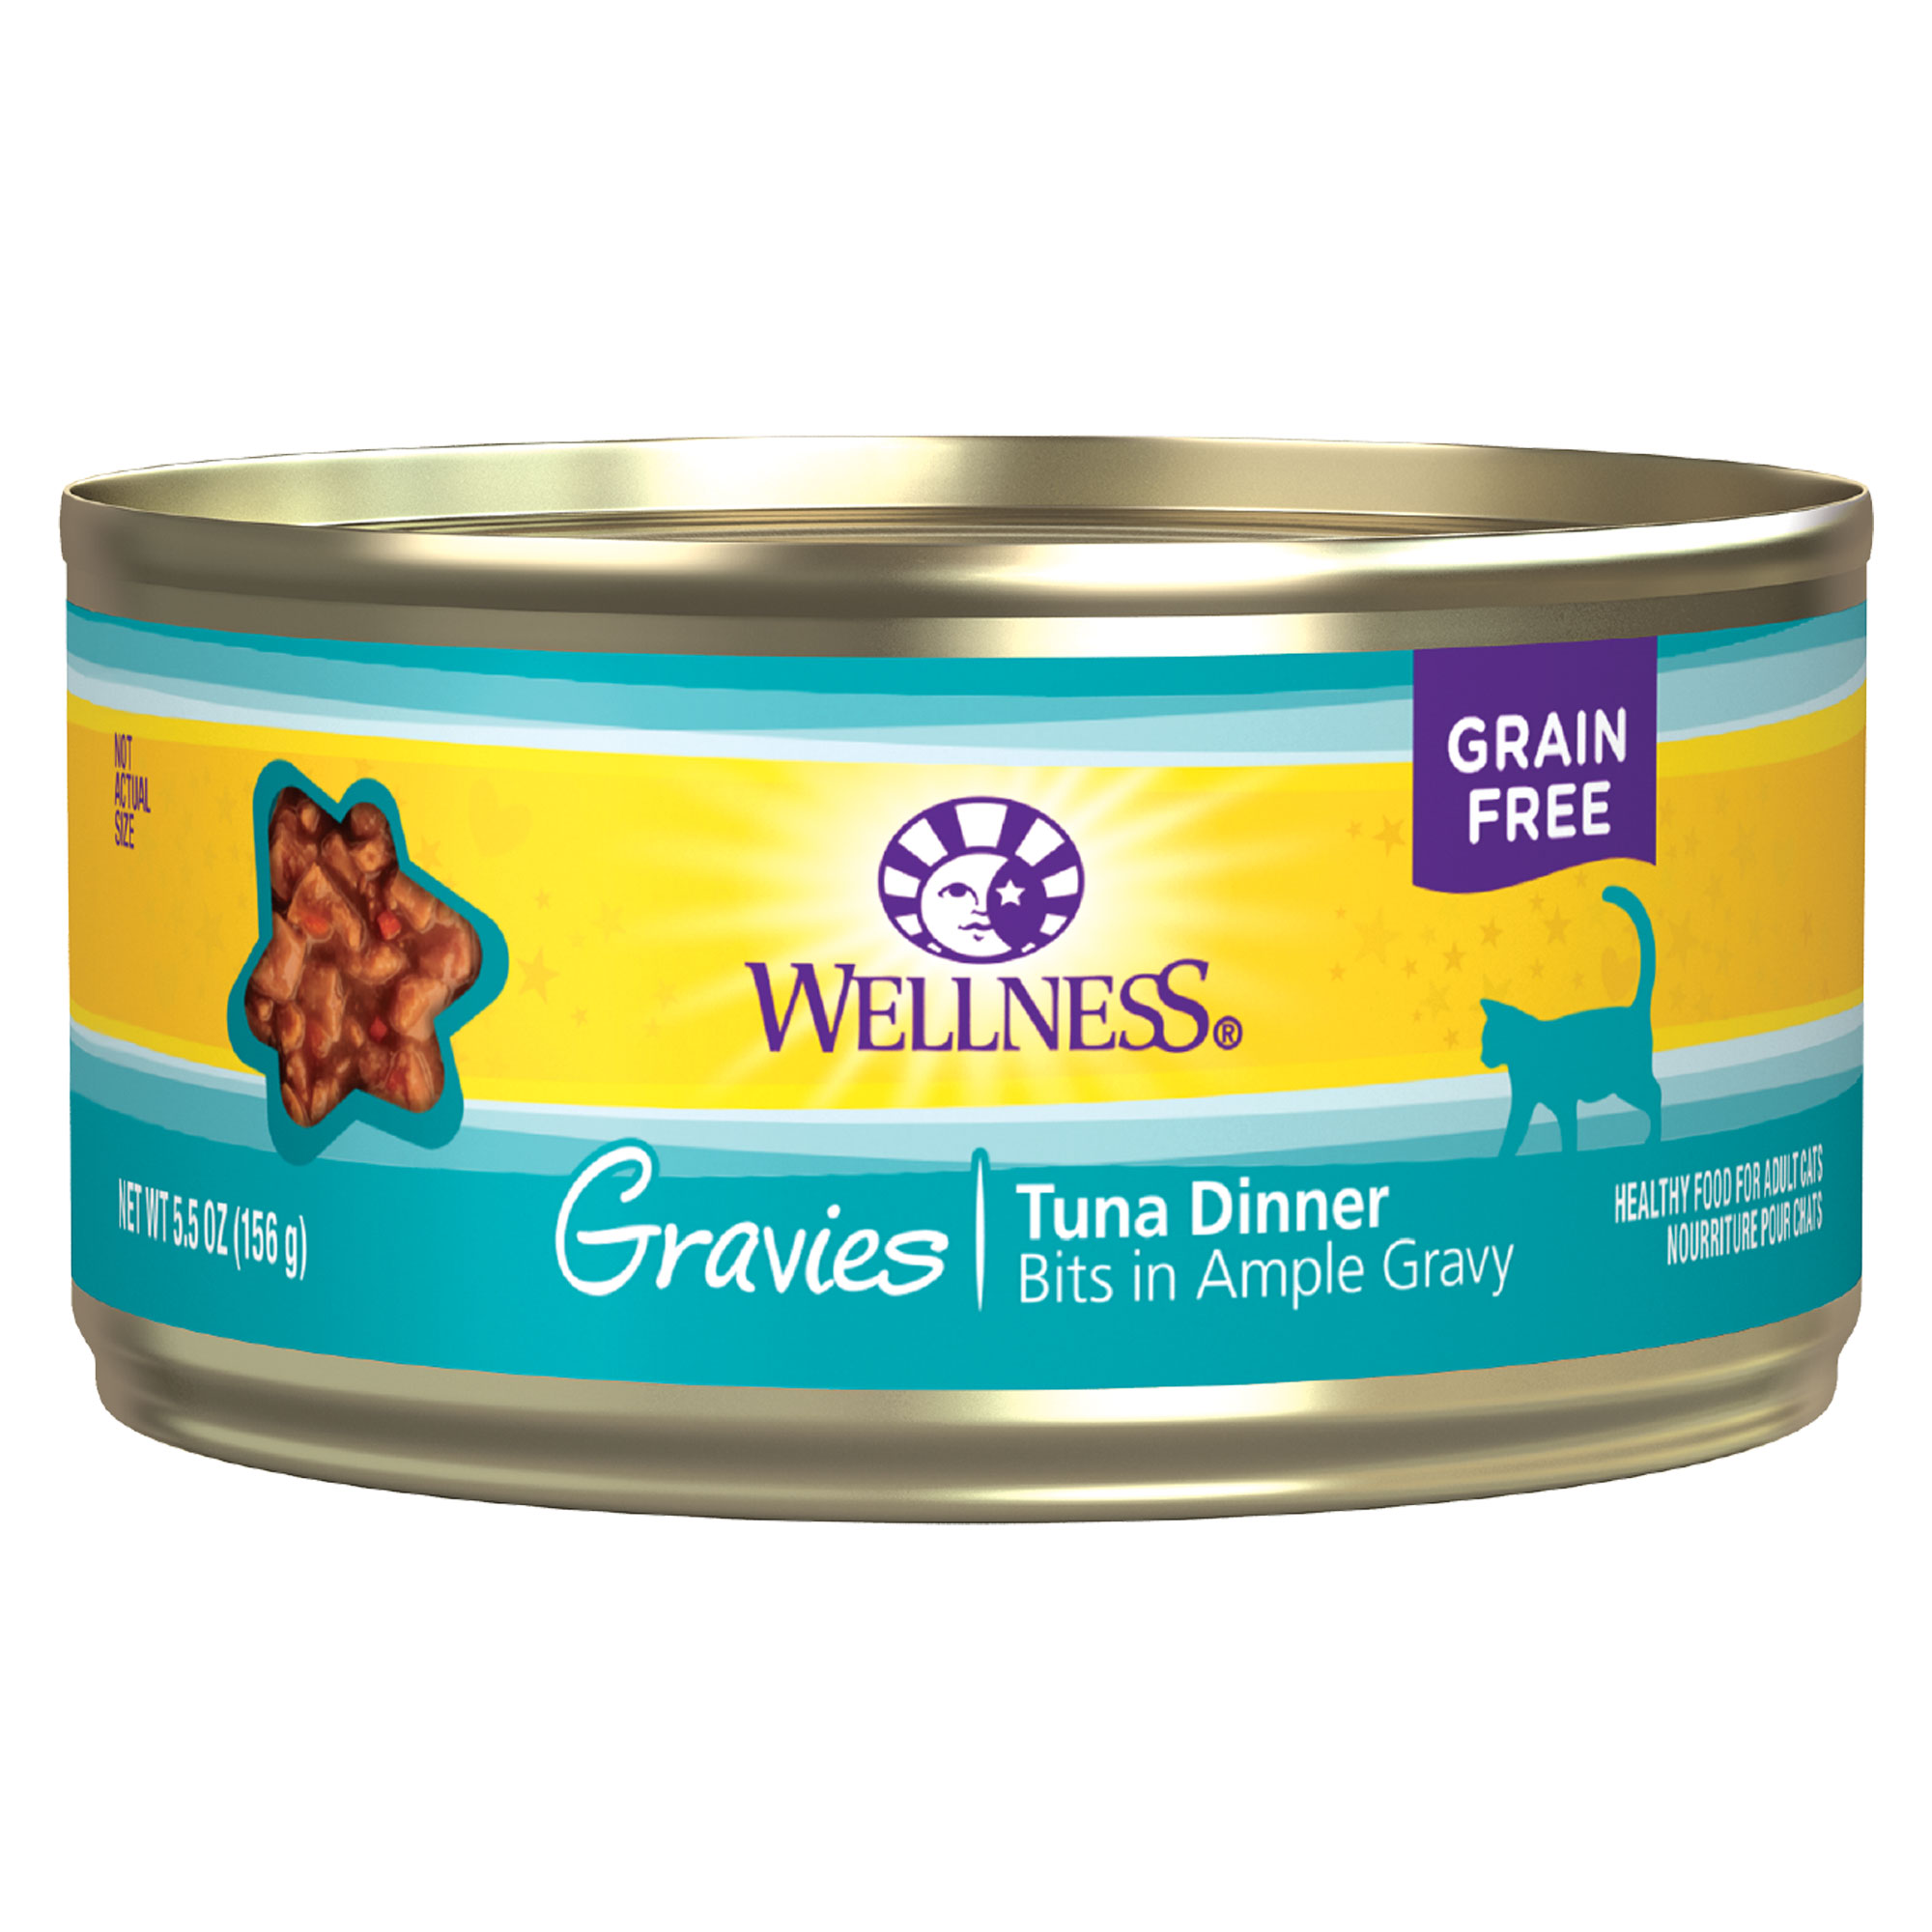 Wellness Complete Health Gravies Grain Free Canned Cat Food, Tuna Dinner, 5.5 Ounces (Pack of 12) - image 1 of 9